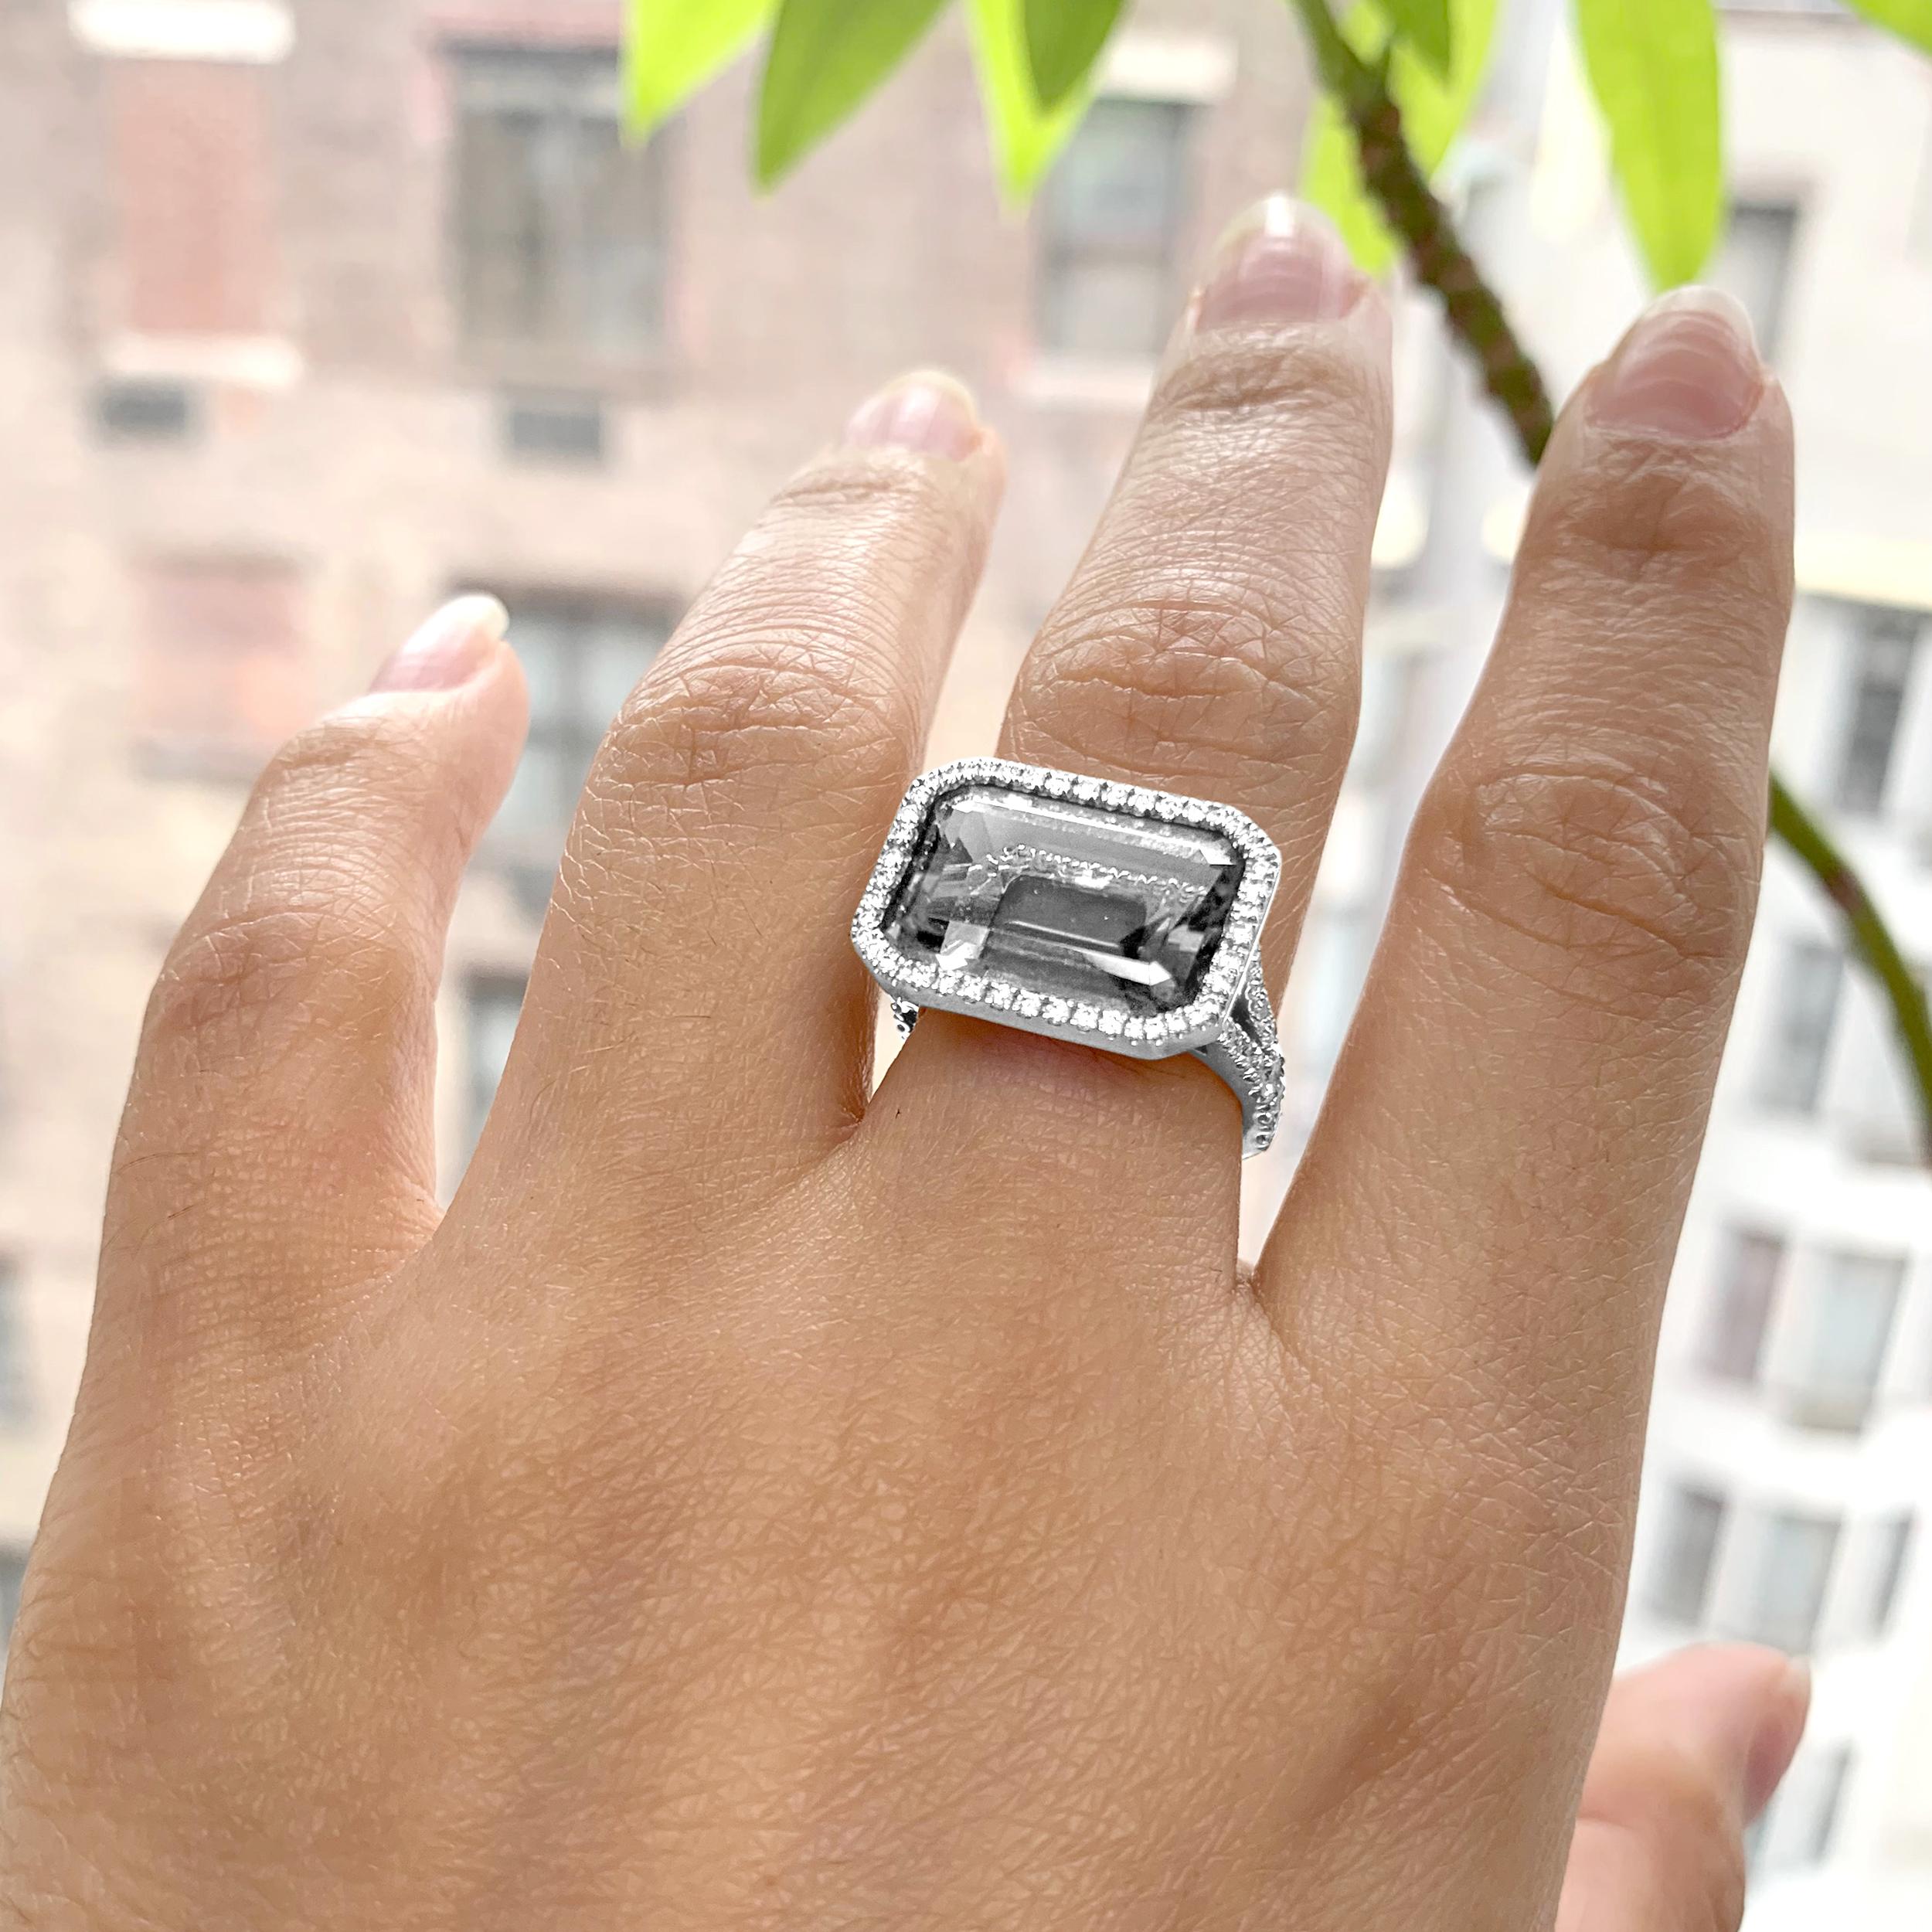 Rock Crystal Emerald Cut Ring with Diamonds in 18K White Gold, from 'Gossip' Collection. Like any good piece of gossip, this collection carries a hint of shock value. They will have everyone in suspense about what Goshwara will do next.

* Gemstone